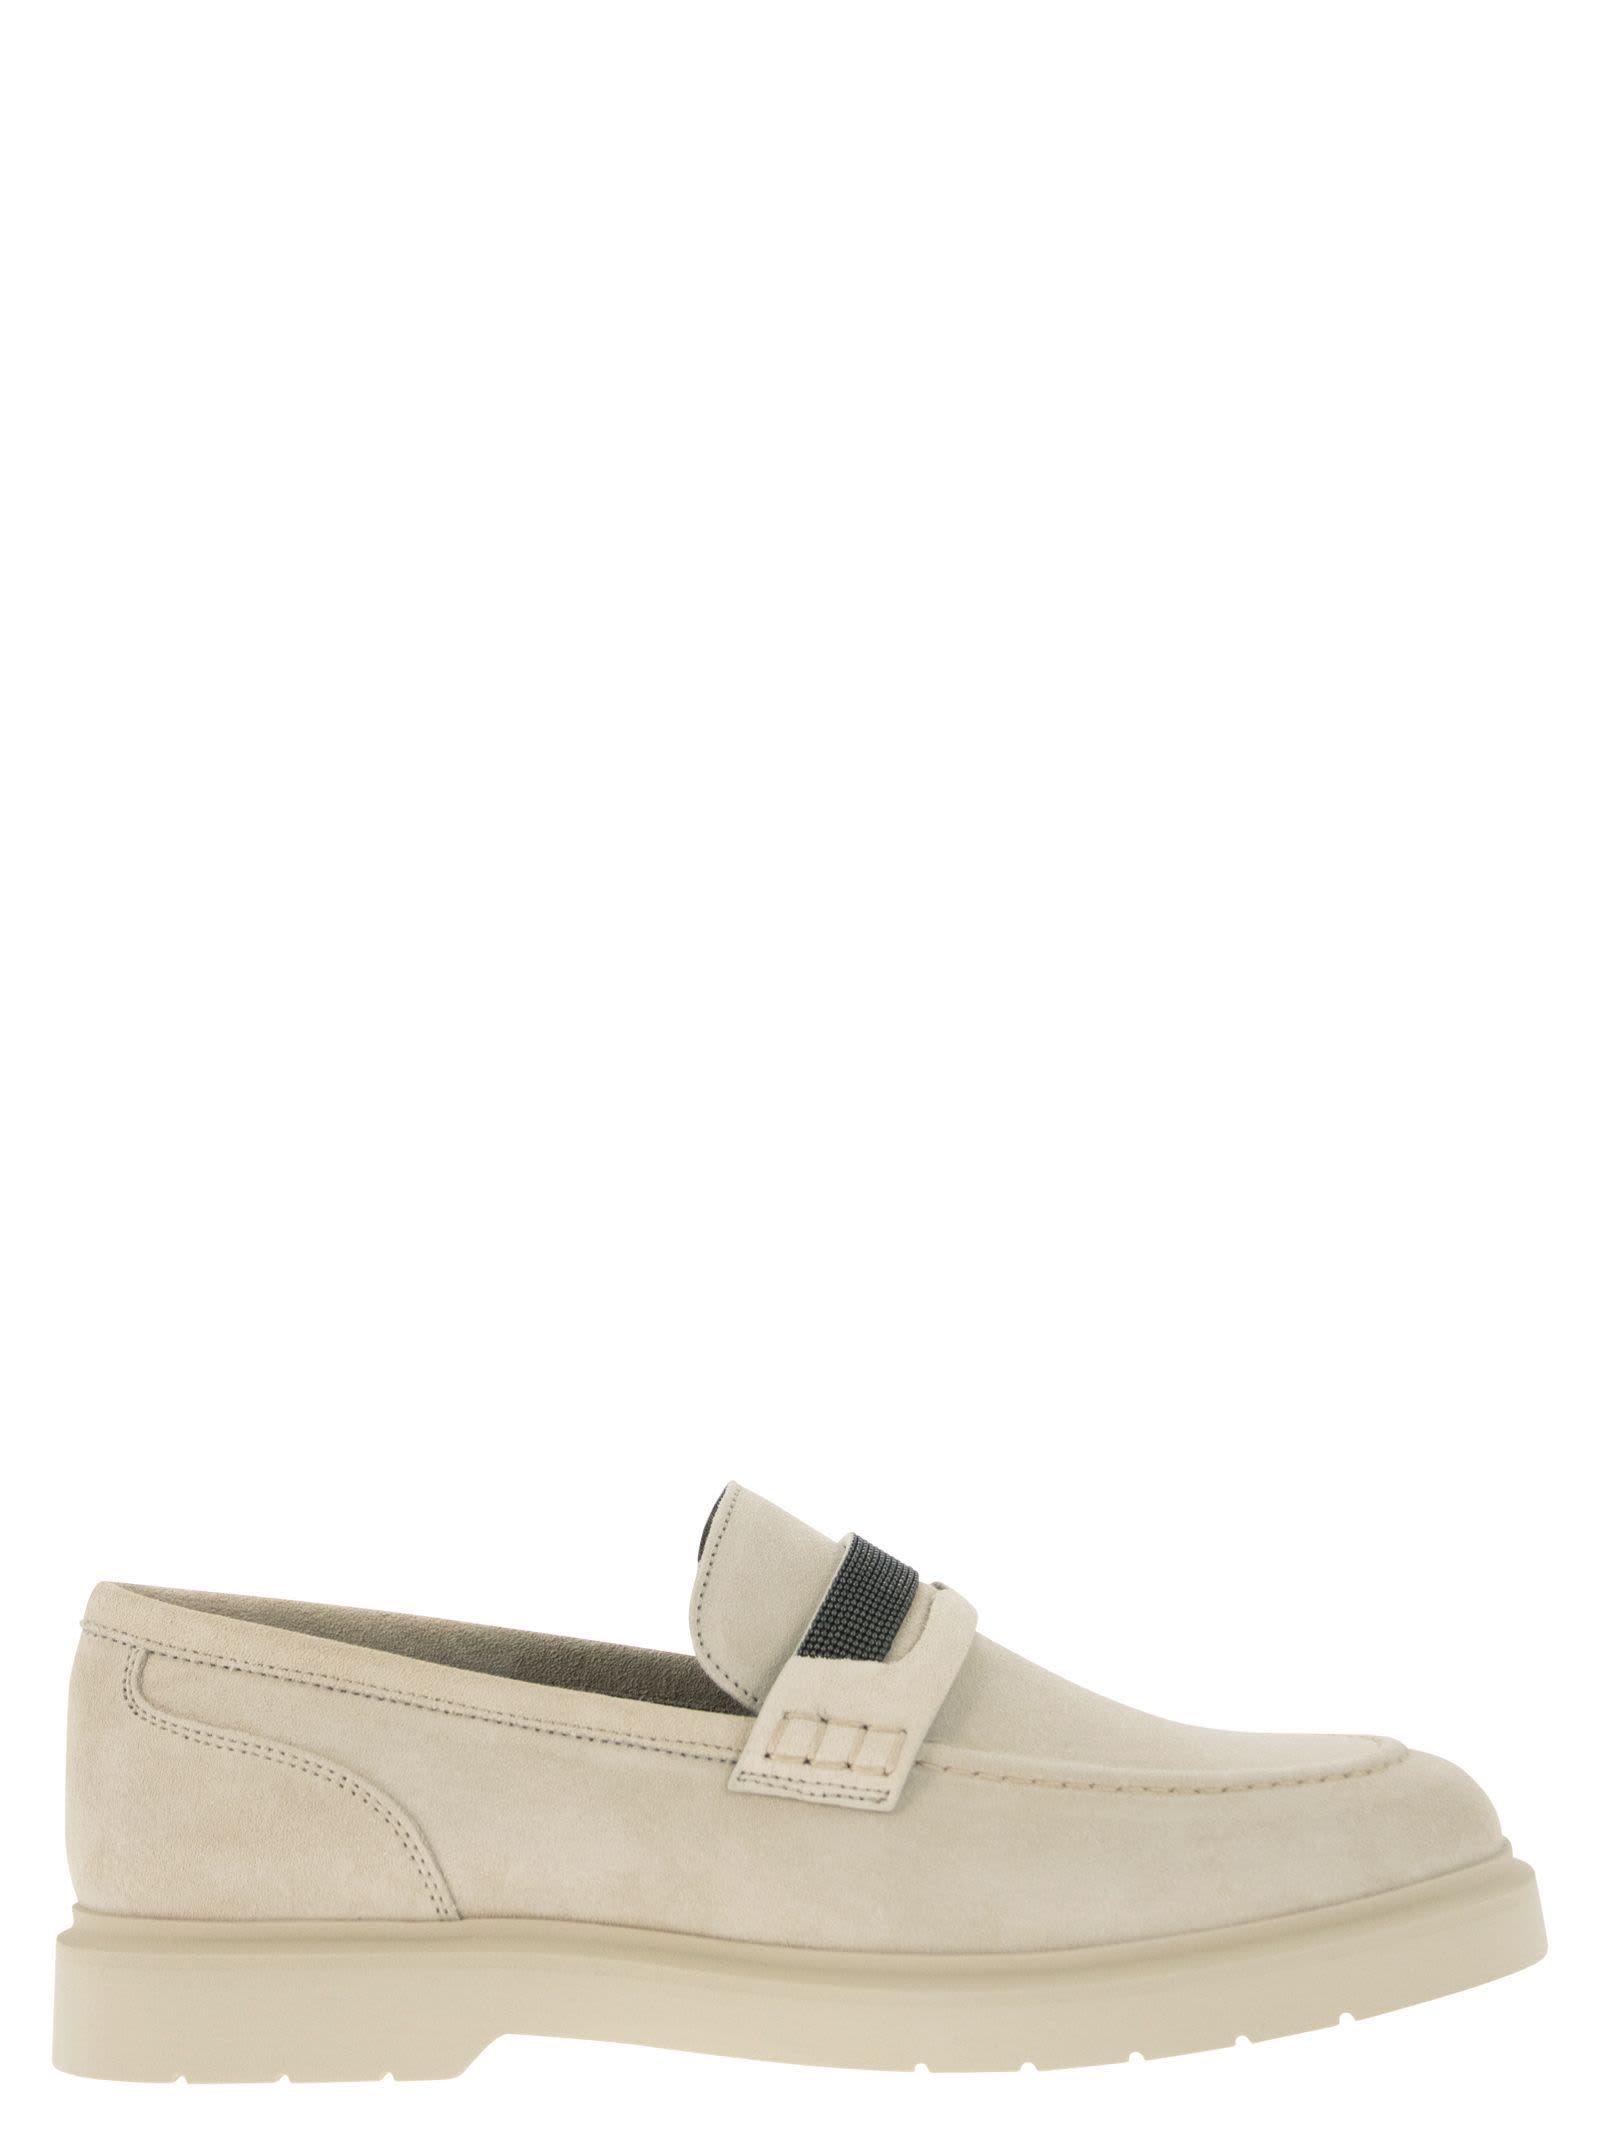 Brunello Cucinelli Suede Penny Loafer With Jewellery - Ivory - female - Size: 37.5